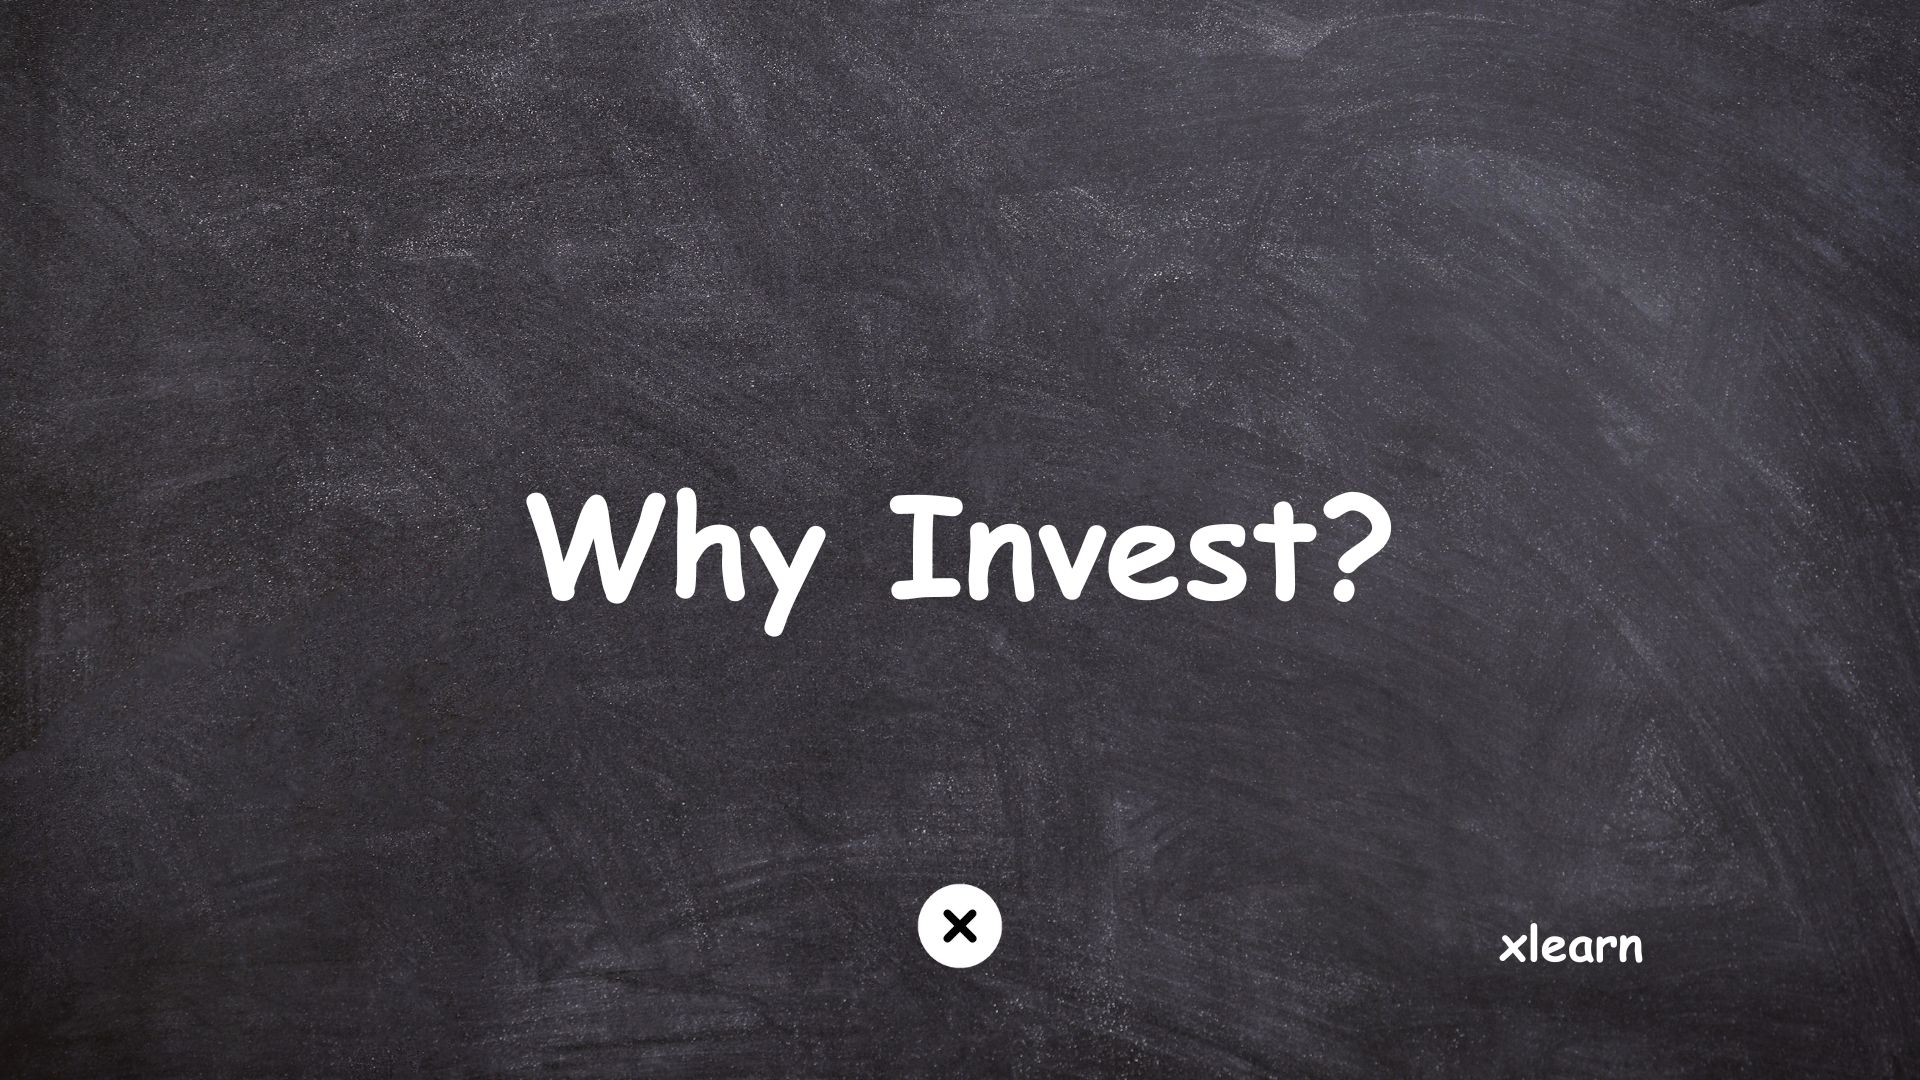 Why is it Important to Invest?